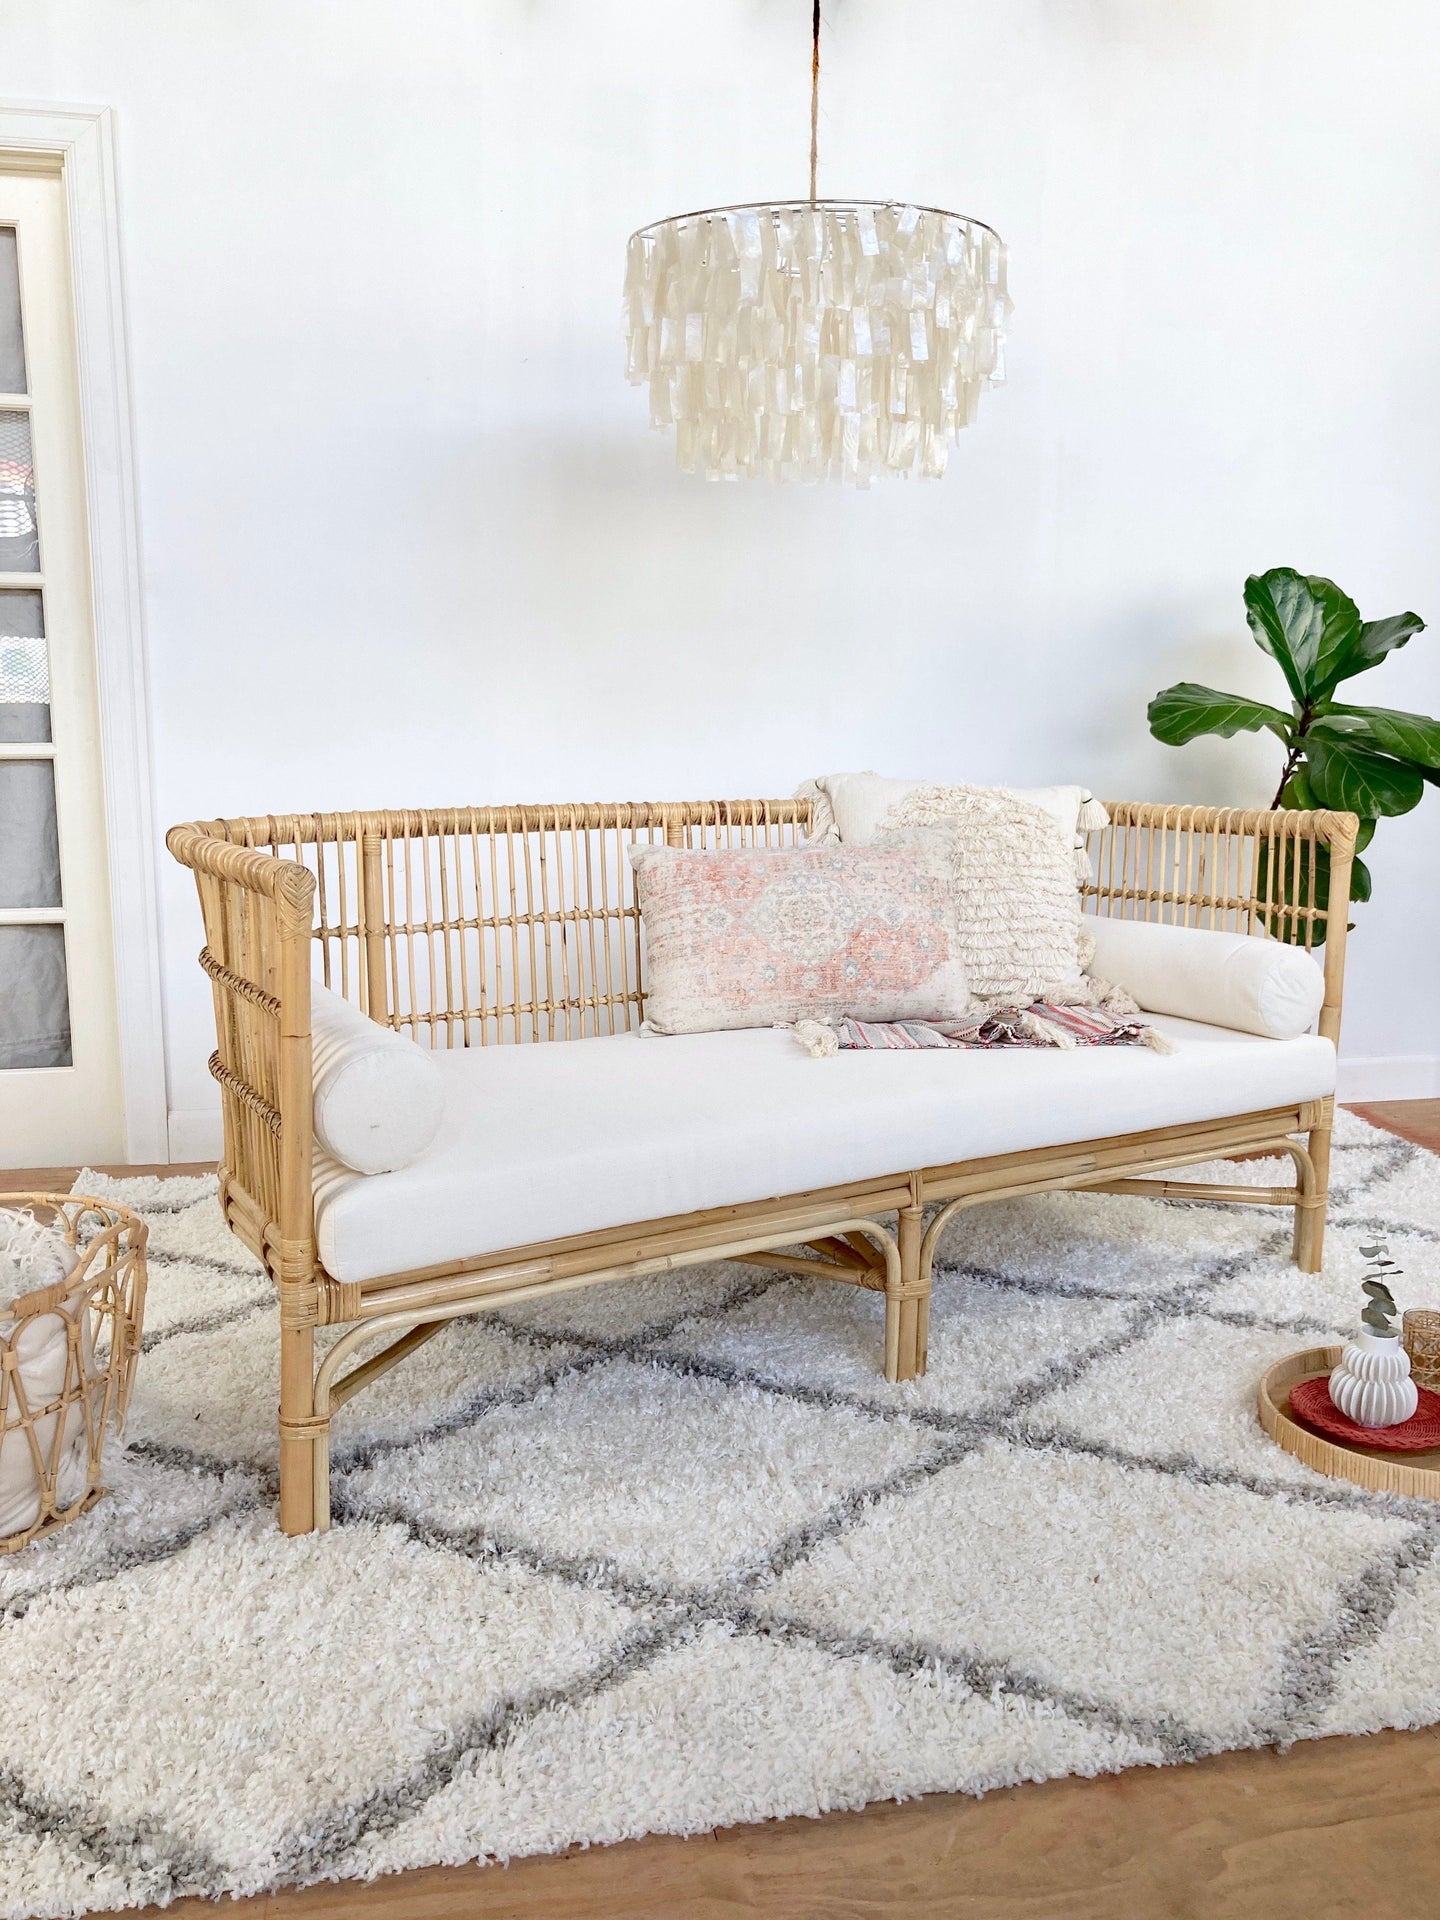 The Daydreamer Rattan Sofa Daybed Picnic Imports 